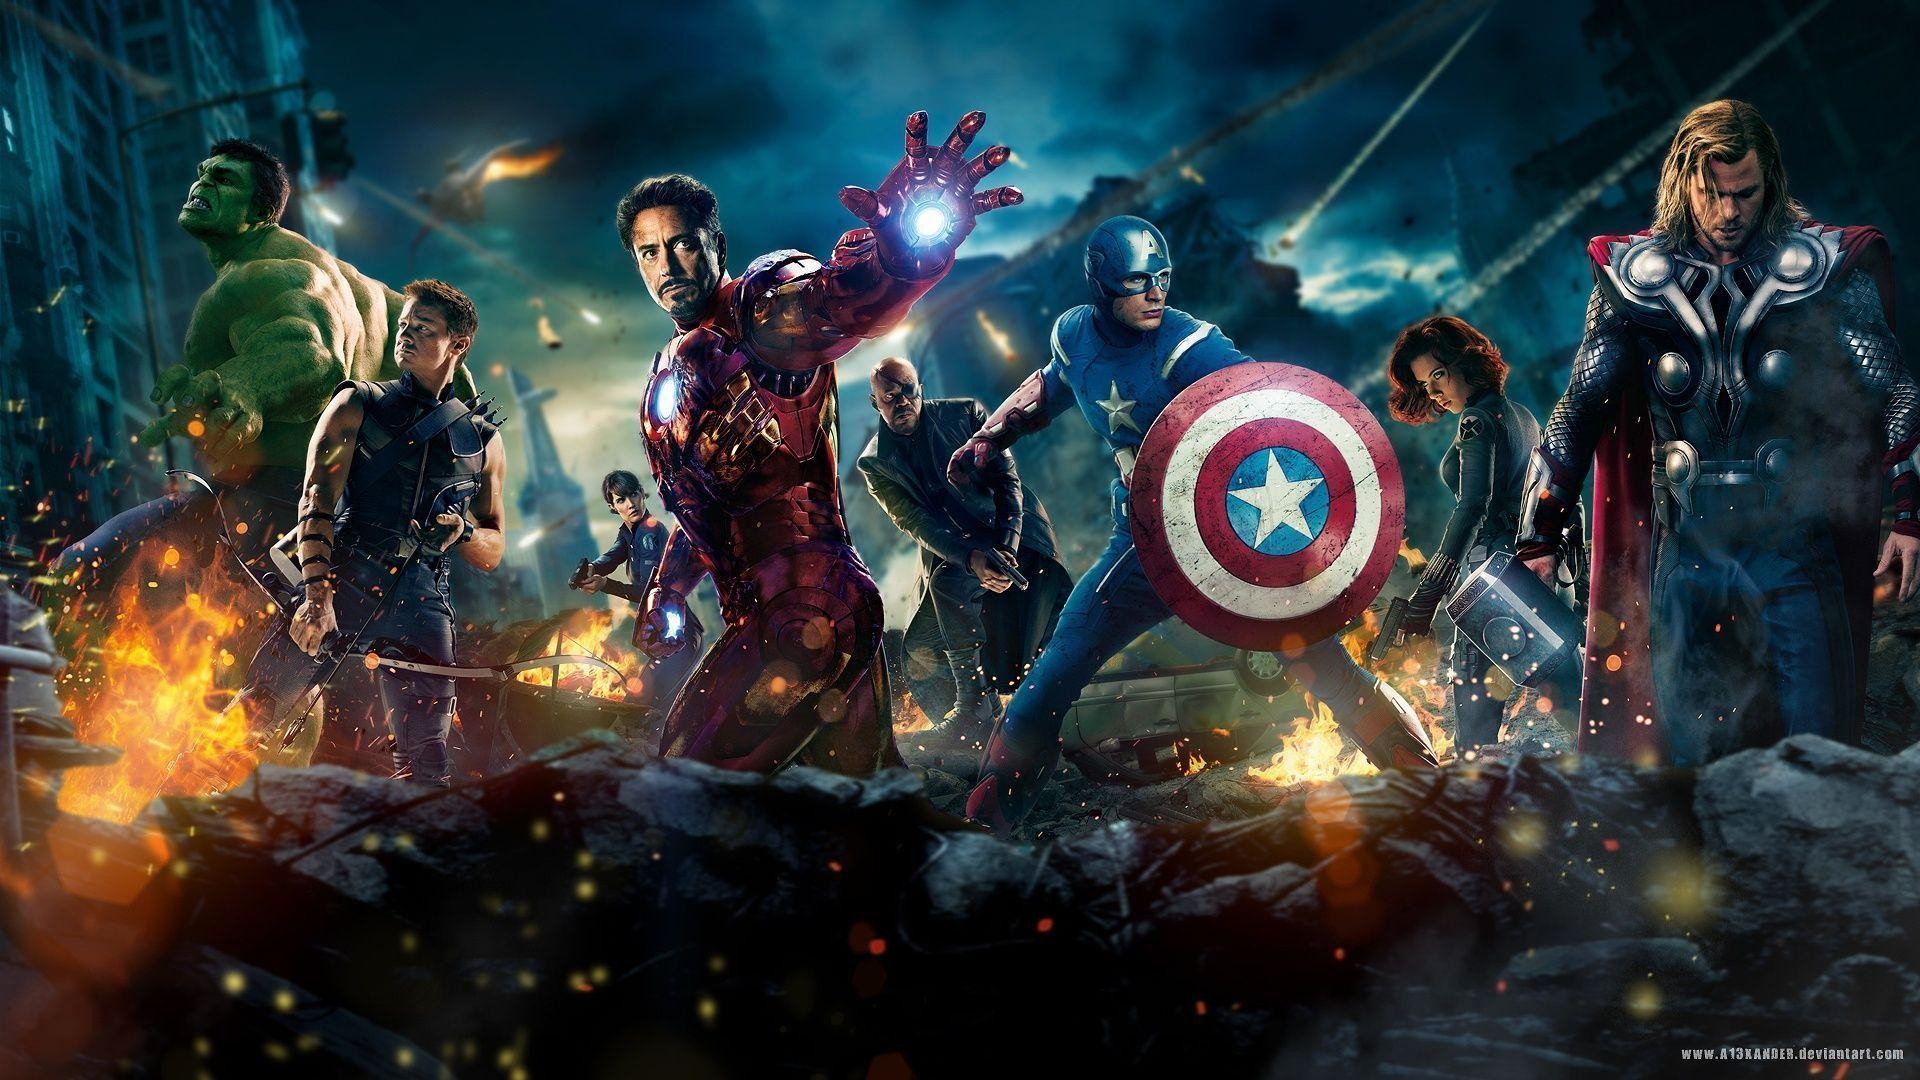 1920x1080 Wallpapers Tagged With AVENGERS | AVENGERS HD Wallpapers | Page 1